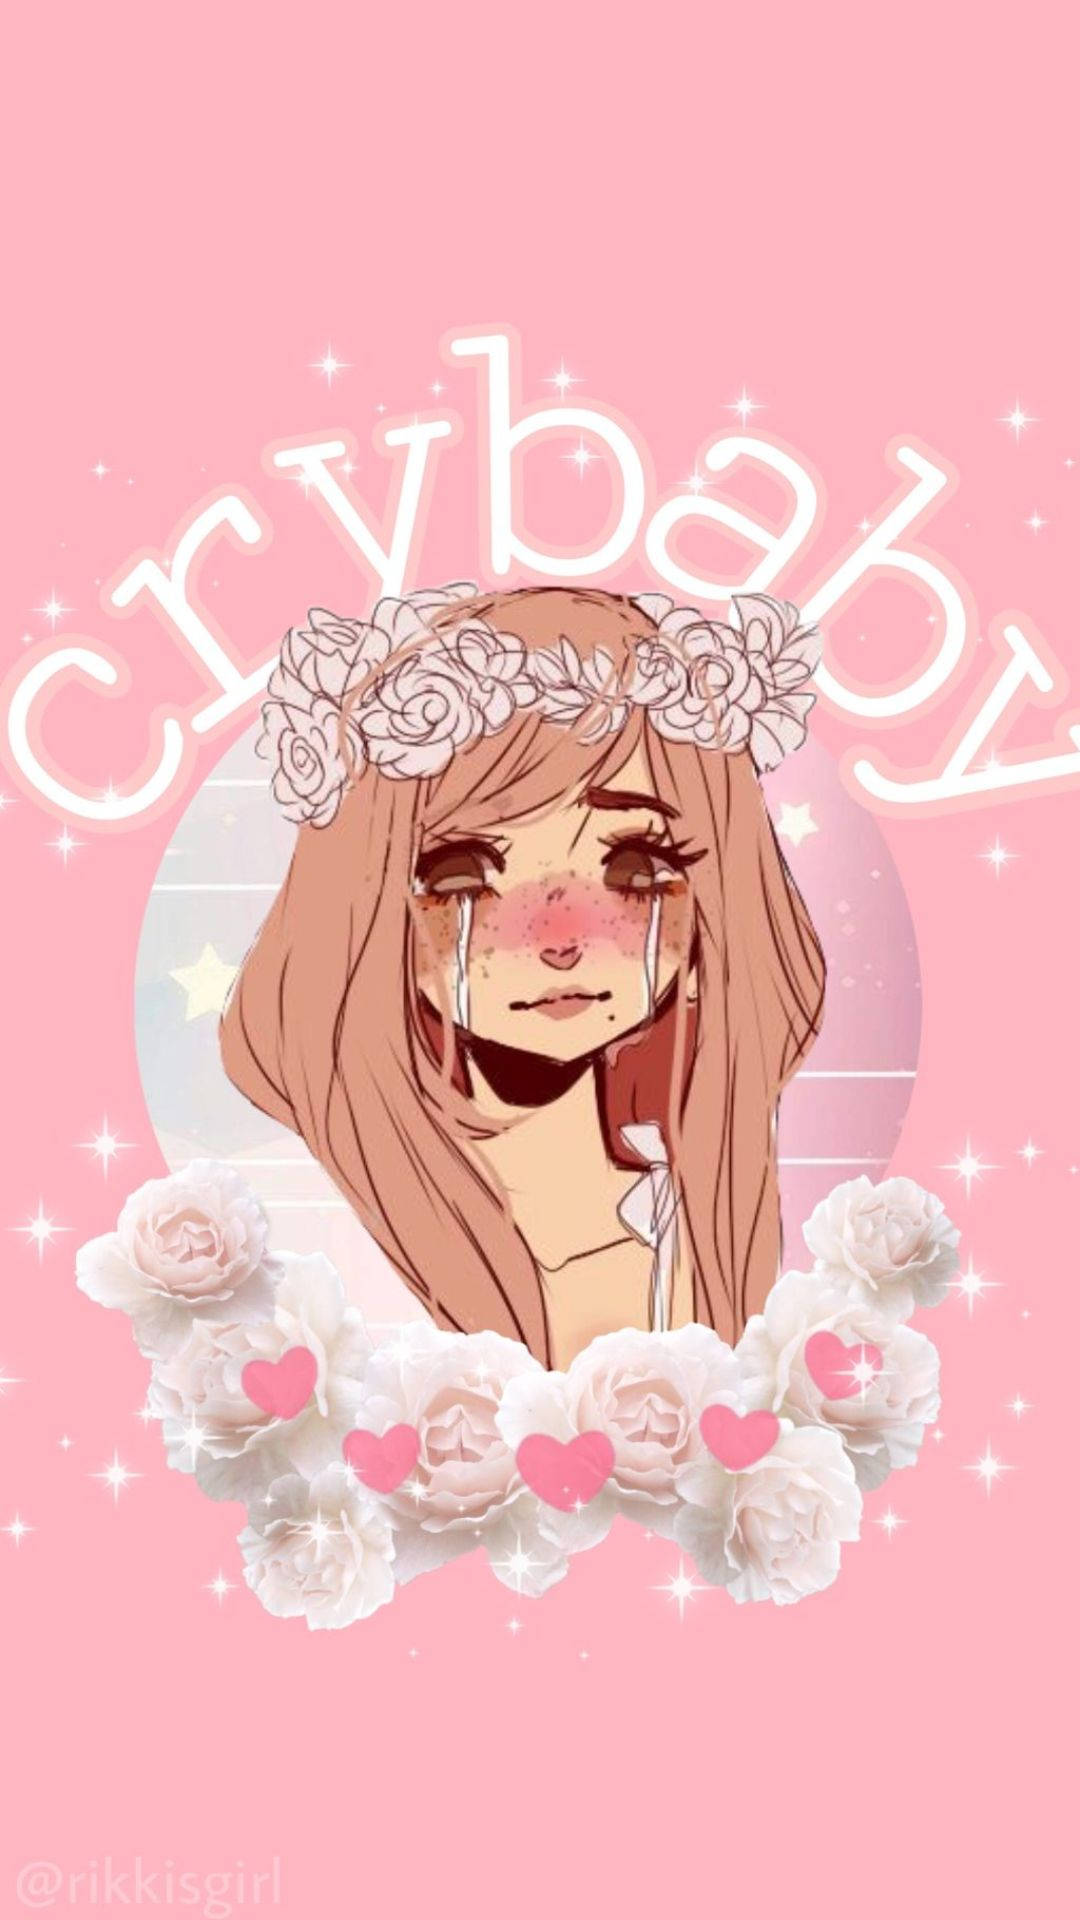 Crybaby Aesthetic Profile Wallpaper